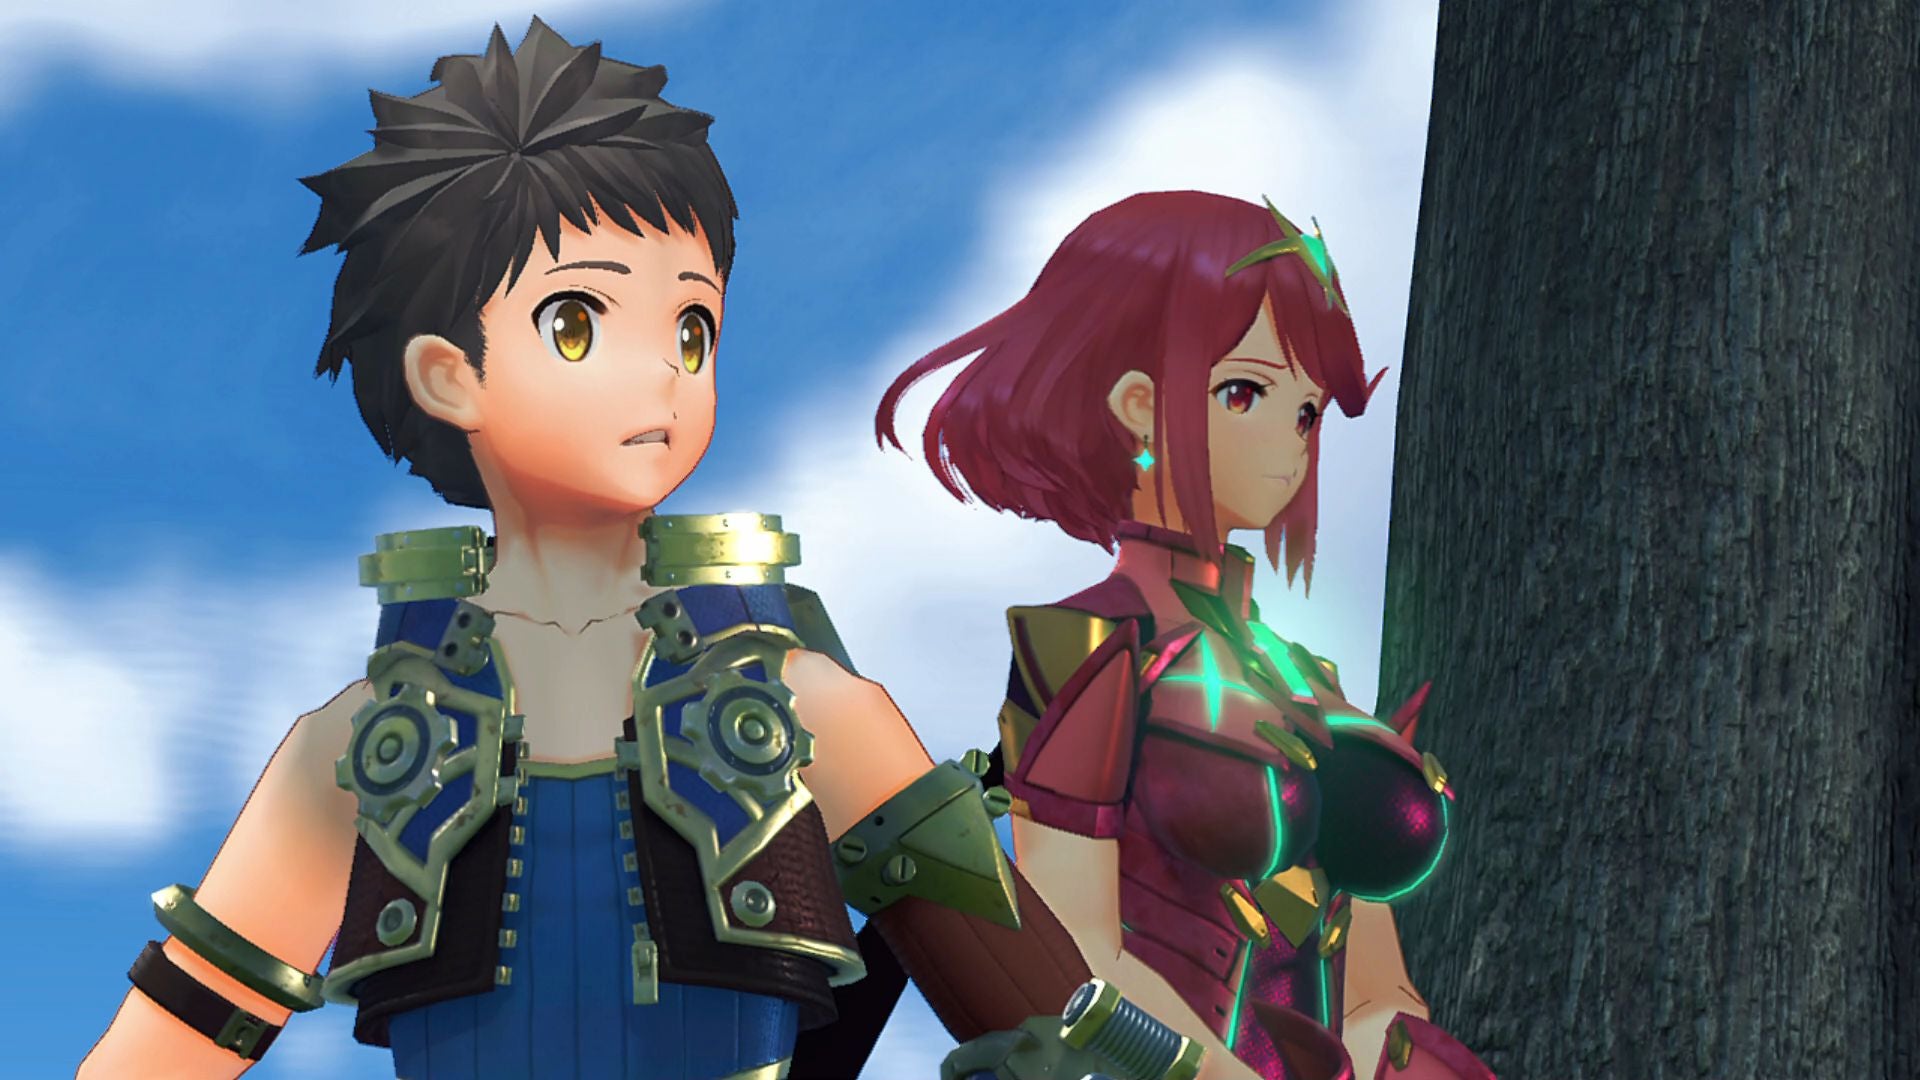 Xenoblade Chronicles 2 (2017), Switch Game